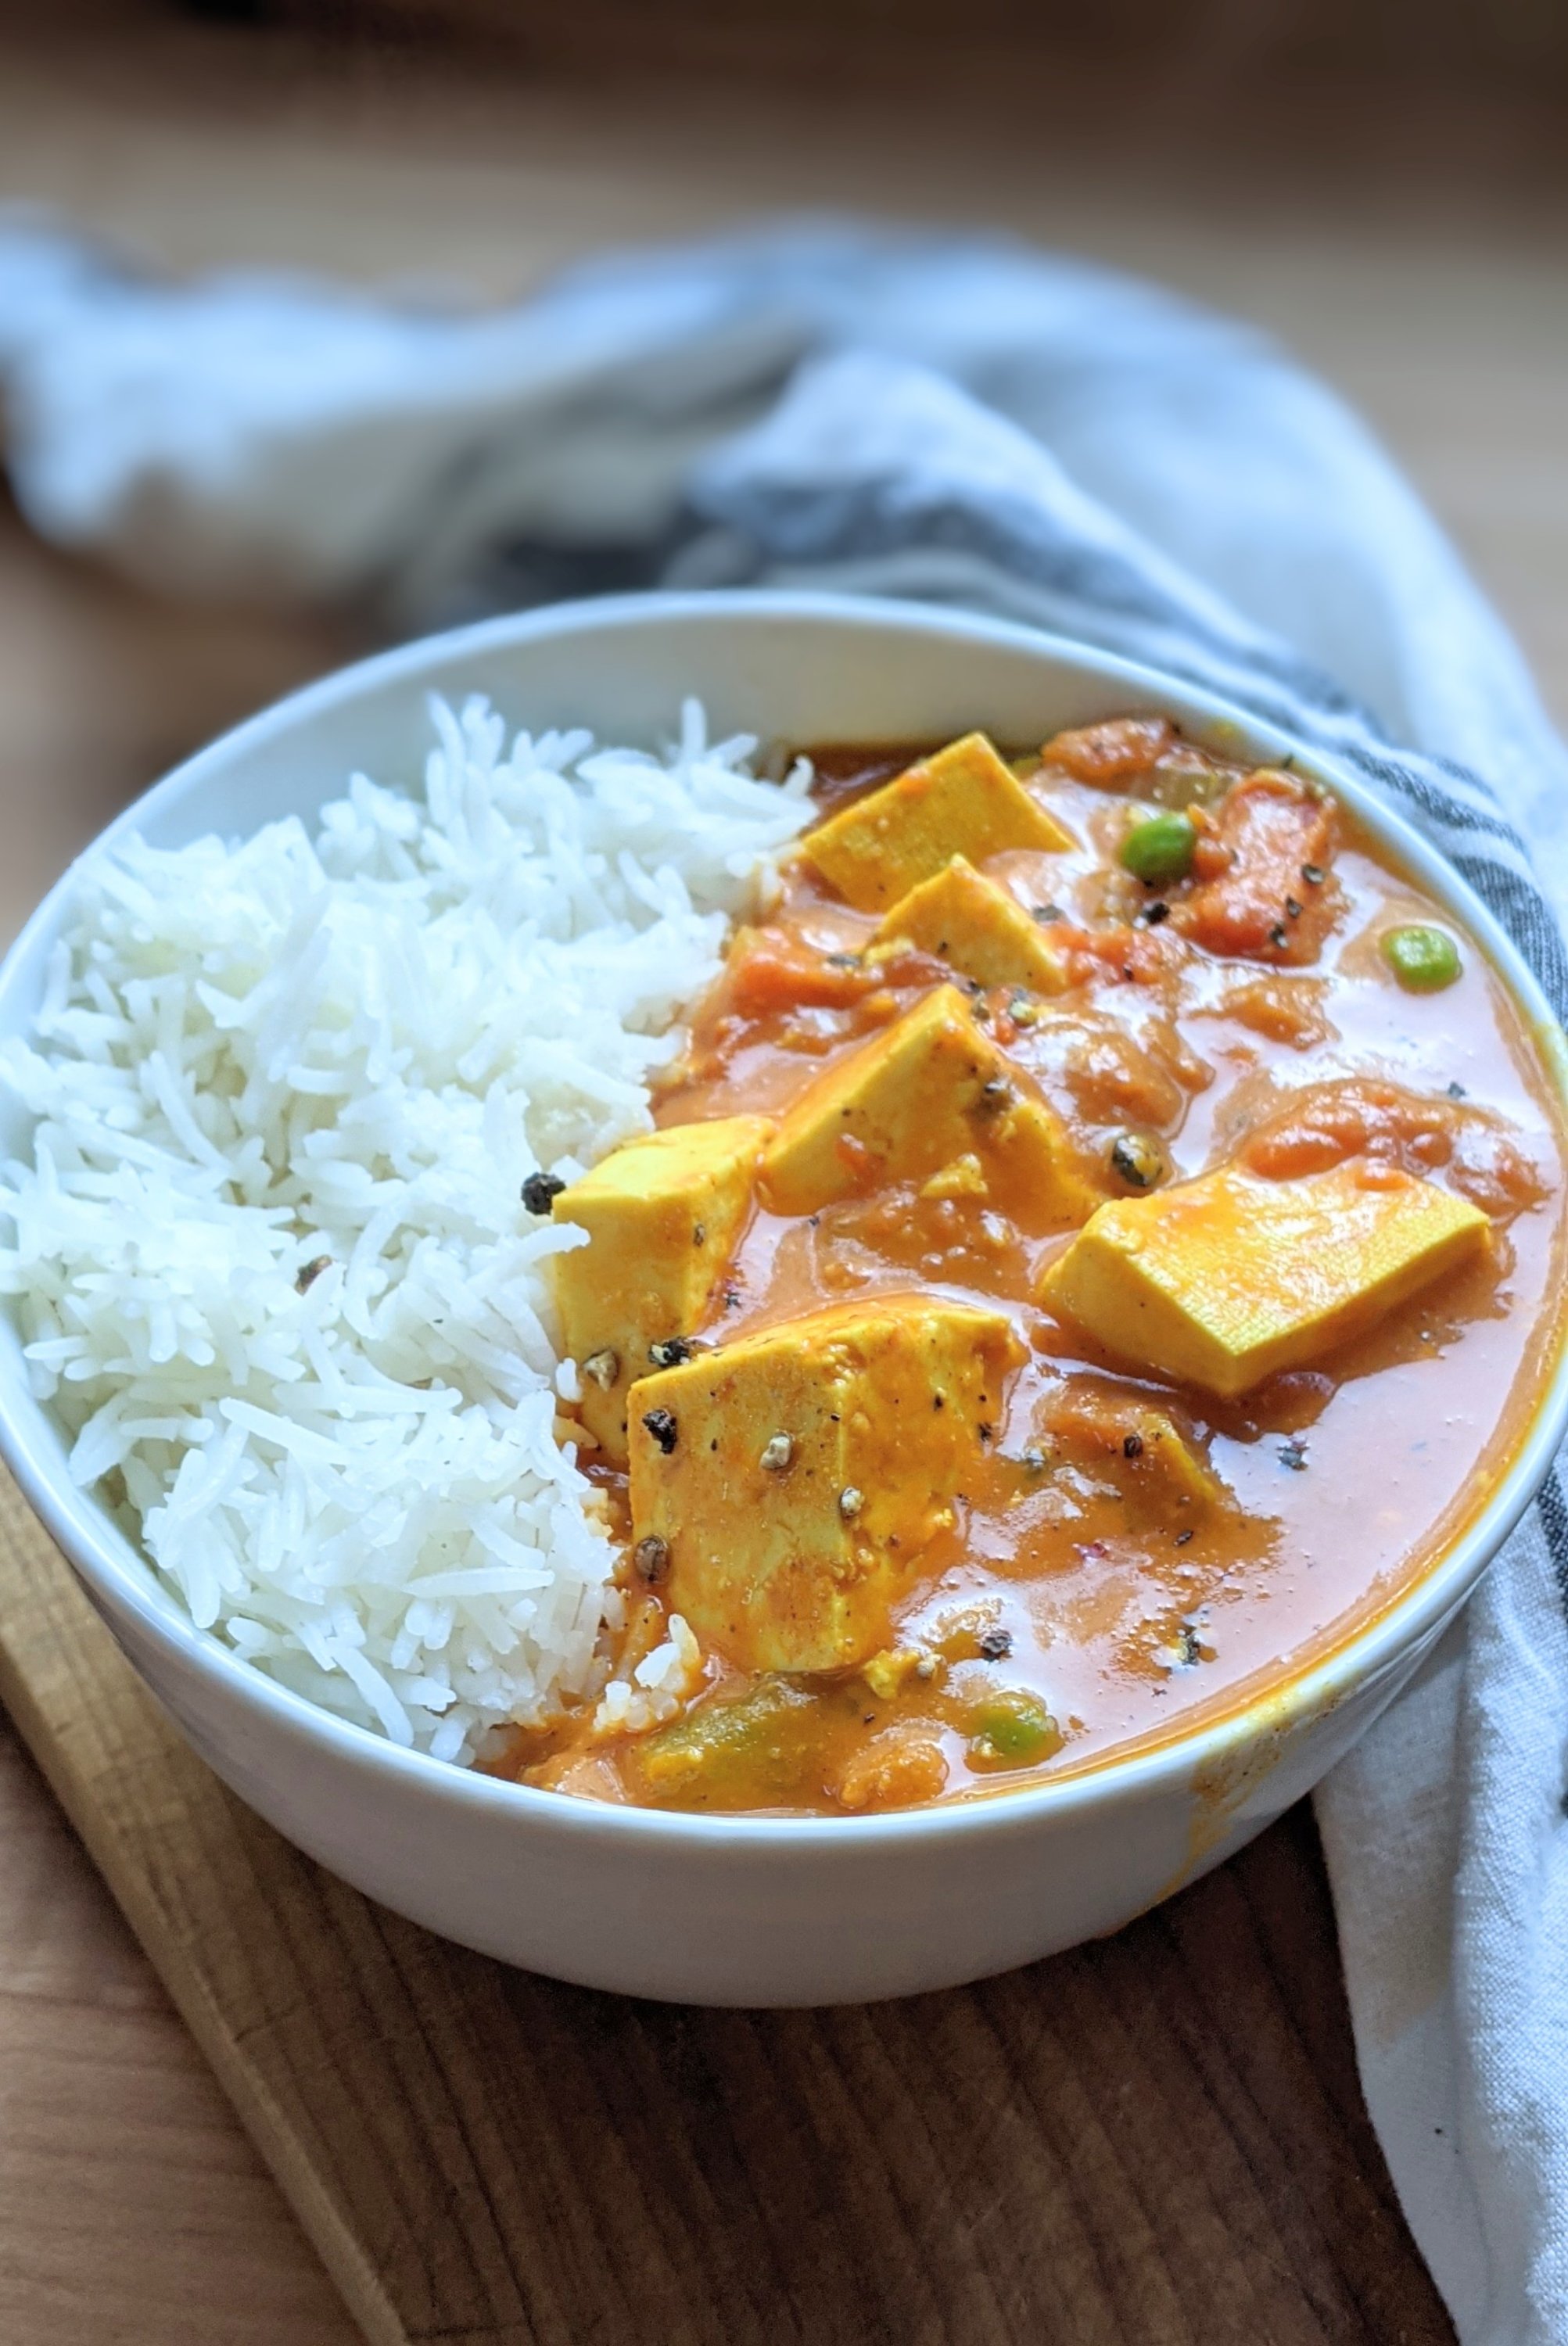 vegan indian tofu recipes todu du pyaza recipe in a bowl with basmati rice a creamy tofu curry with indian spices turmeric coriander seeds and peas